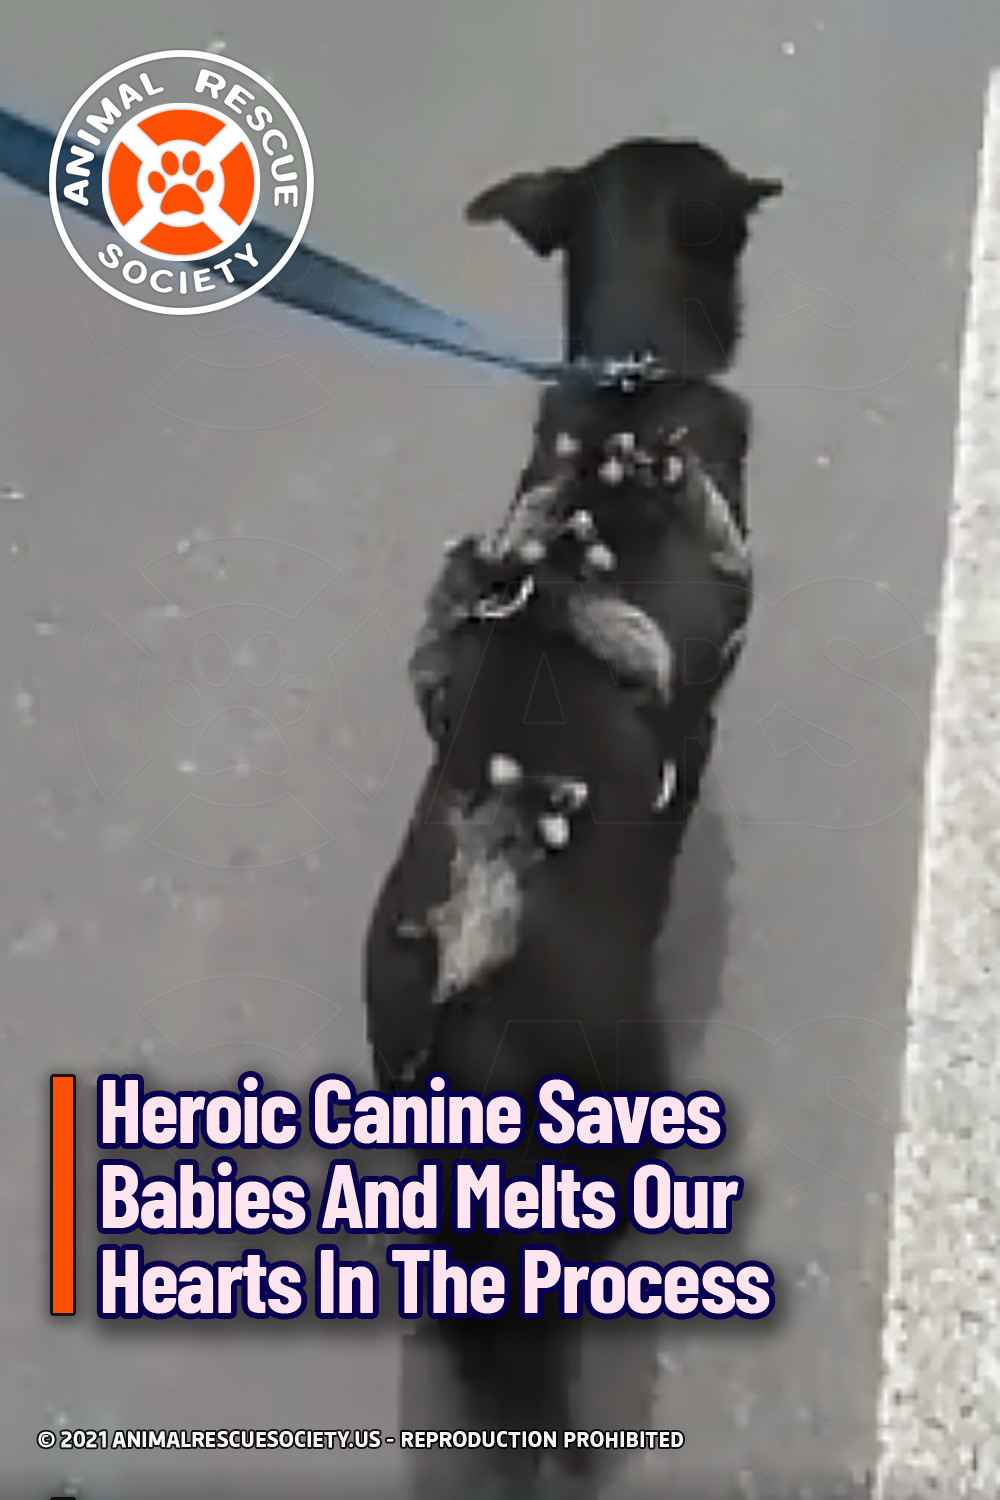 Heroic Canine Saves Babies And Melts Our Hearts In The Process